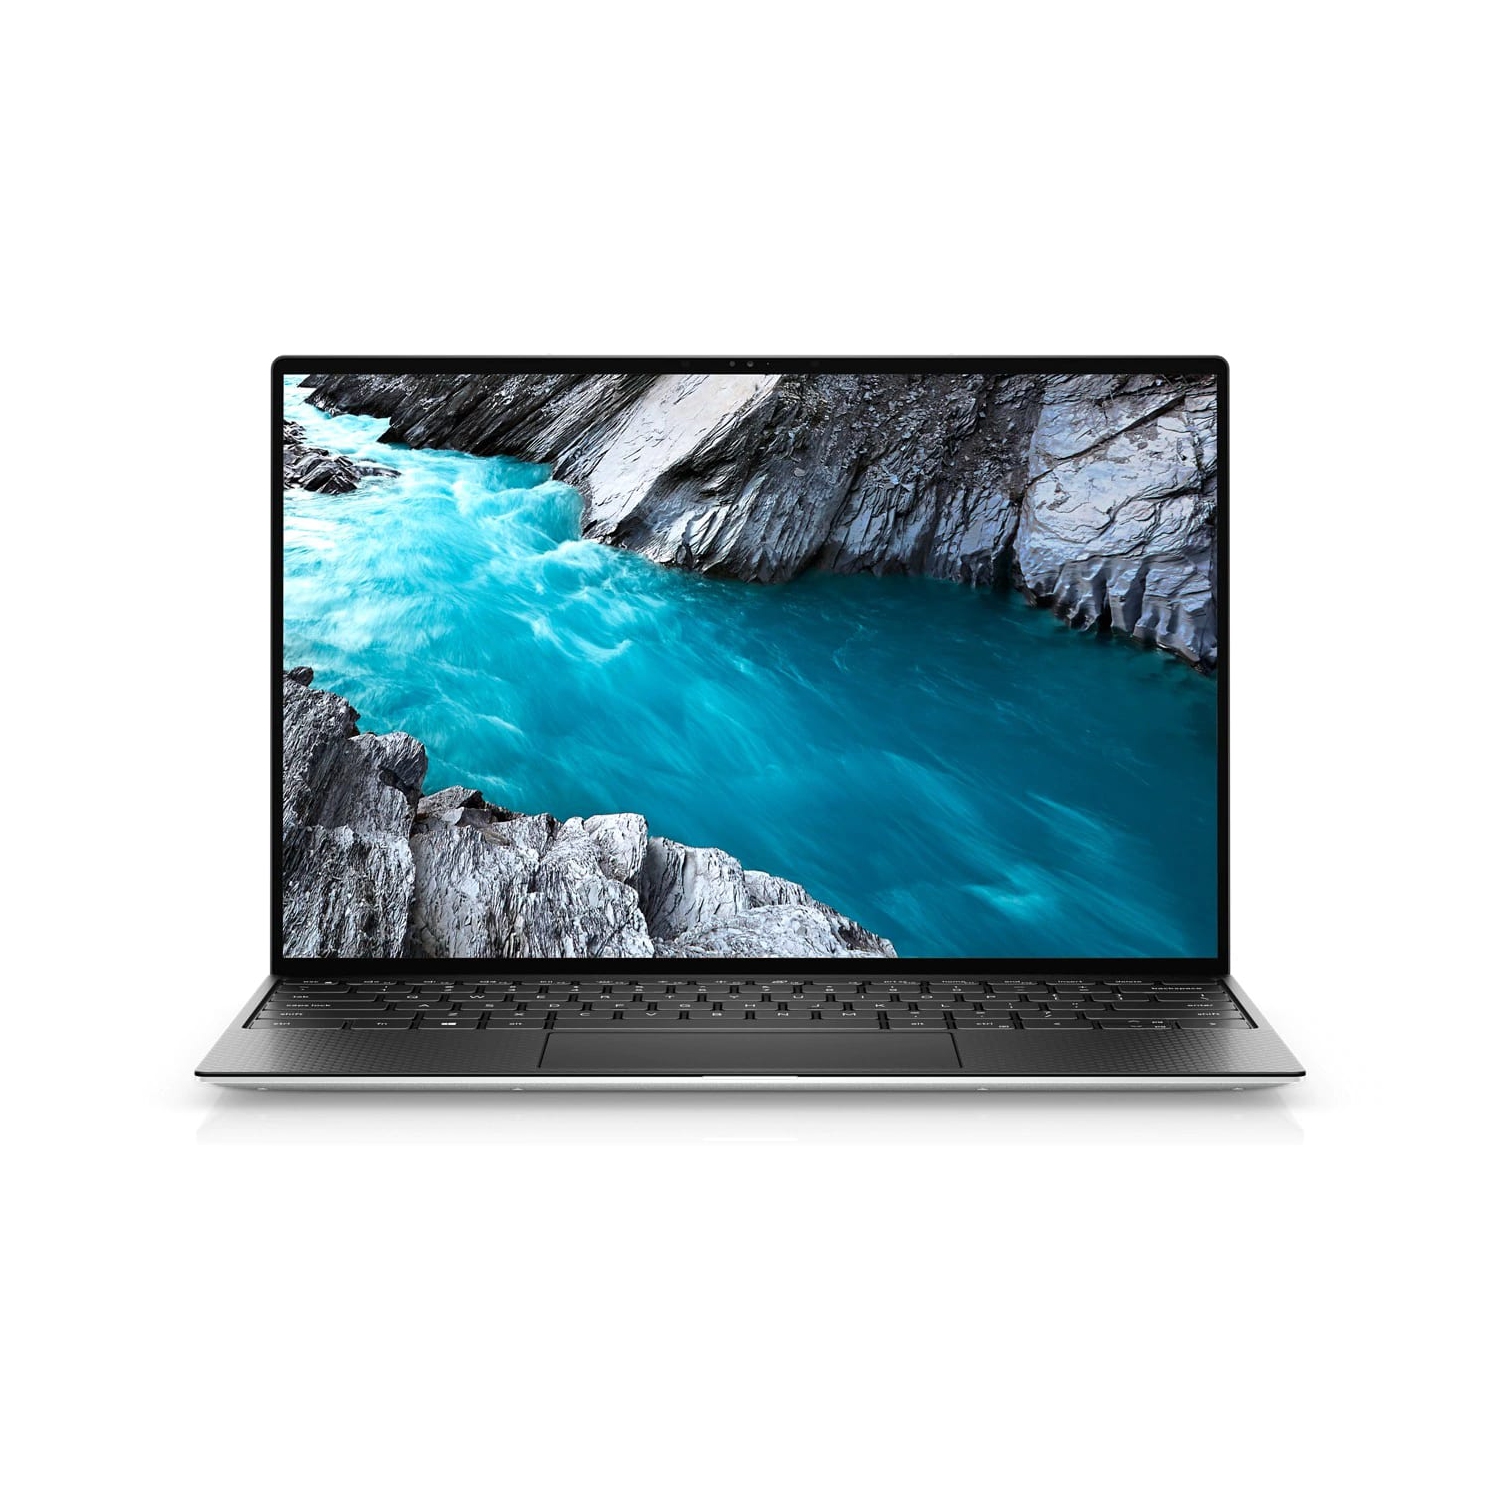 Refurbished (Excellent) - Dell XPS 13 9310 Laptop (2020) | 13.4" 4K Touch | Core i7 - 2TB SSD - 16GB RAM | 4 Cores @ 5 GHz - 11th Gen CPU Certified Refurbished